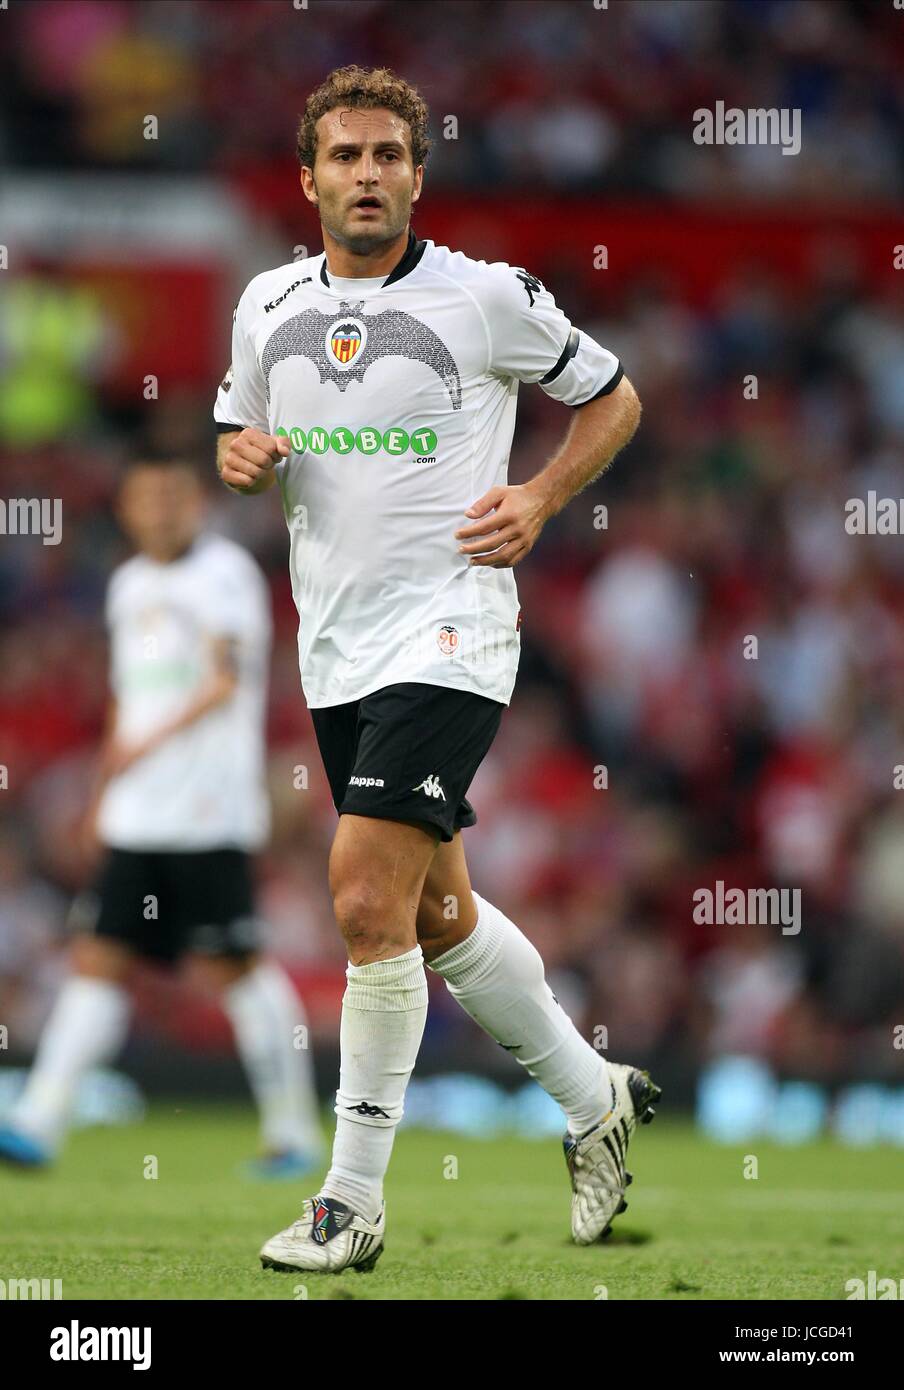 RUBEN BARAJA VALENCIA CF MANCHESTER UNITED V VALENCIA CF OLD TRAFFORD, MANCHESTER , ENGLAND 05 August 2009 DIY98315     WARNING! This Photograph May Only Be Used For Newspaper And/Or Magazine Editorial Purposes. May Not Be Used For, Internet/Online Usage Nor For Publications Involving 1 player, 1 Club Or 1 Competition, Without Written Authorisation From Football DataCo Ltd. For Any Queries, Please Contact Football DataCo Ltd on +44 (0) 207 864 9121 Stock Photo